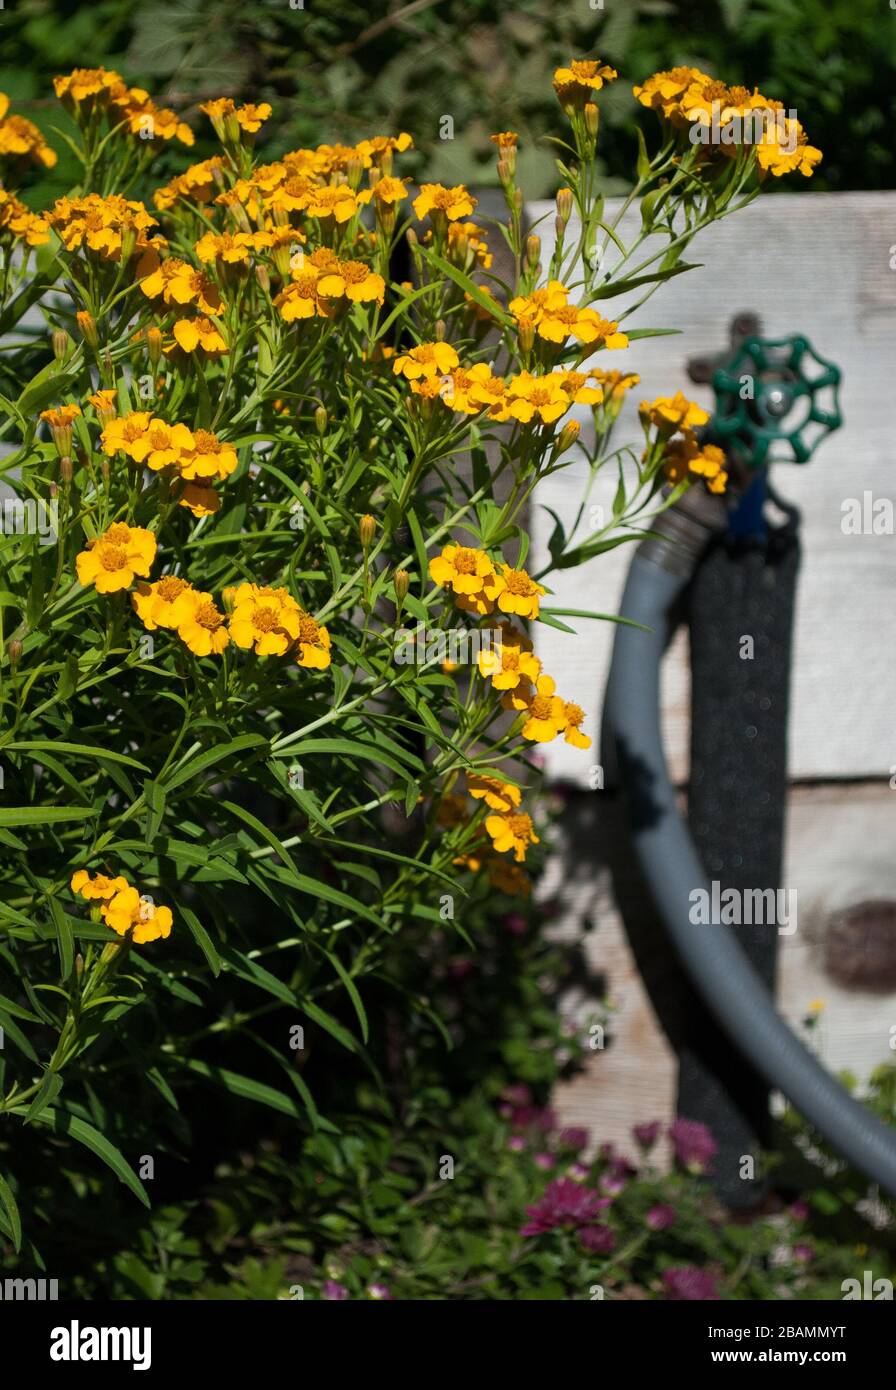 Garden scene with water spigot and coreopsis Stock Photo